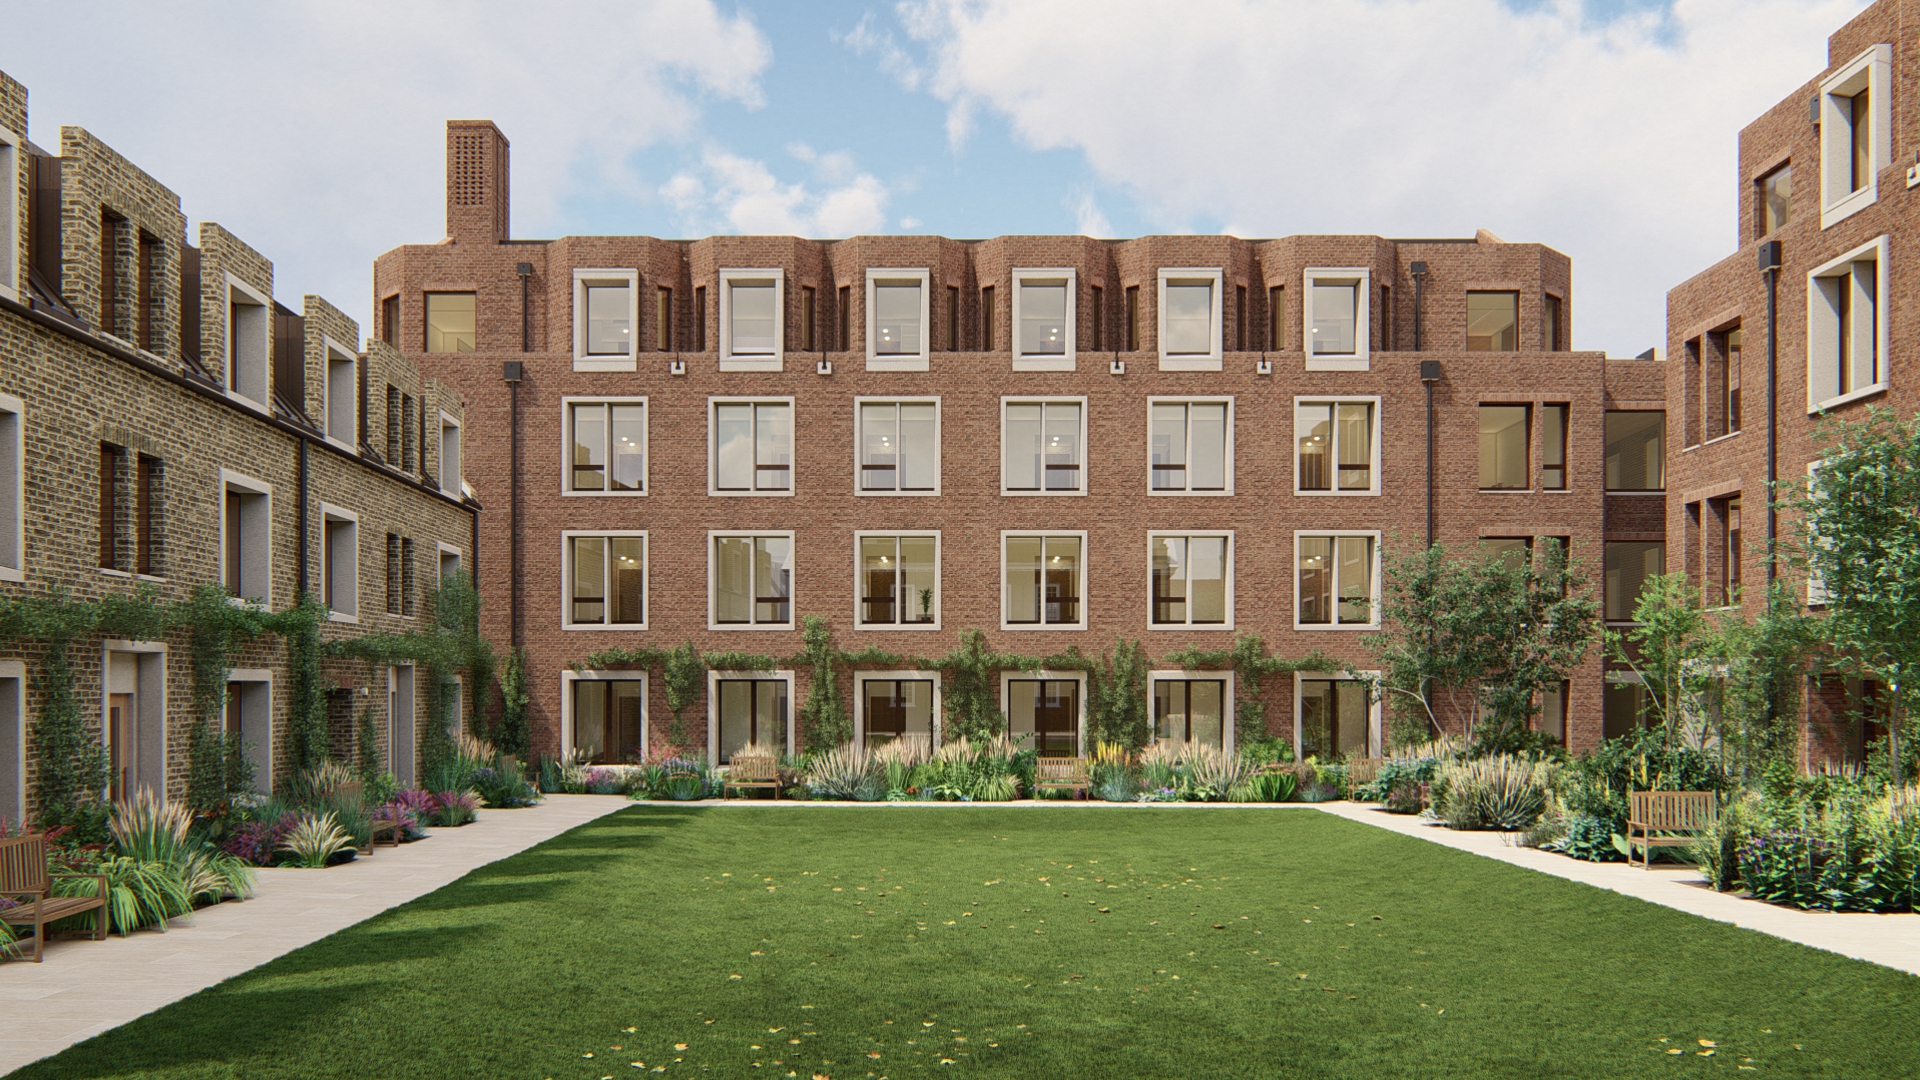 The expansion and construction of student amenities for Cambridge’s prestigious Pembroke College